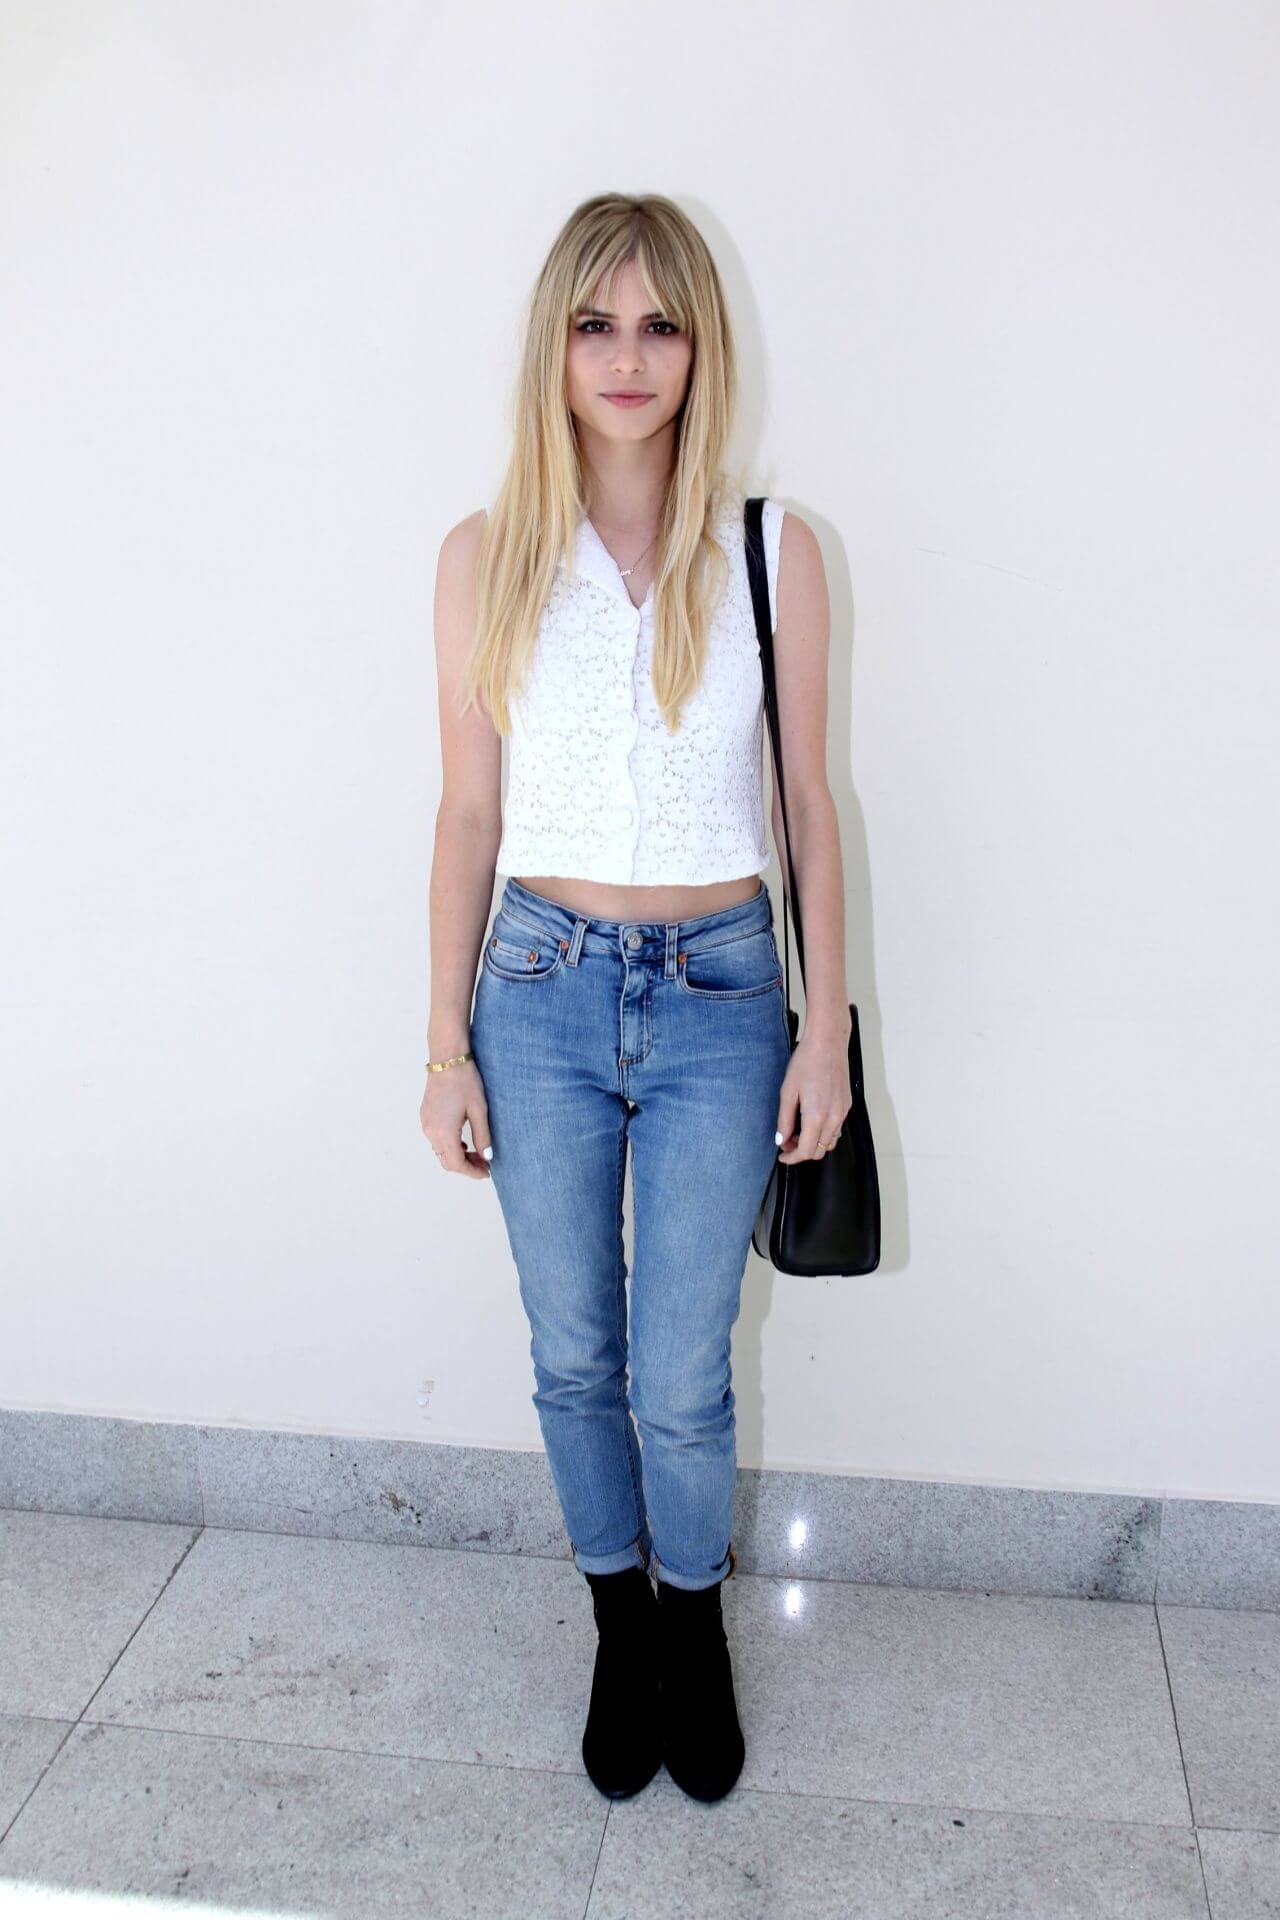 Carlson Young  In White Crop Top With Blue Denim Jeans At Bloody Weekend Convention in São Paulo with Daniel Sharman